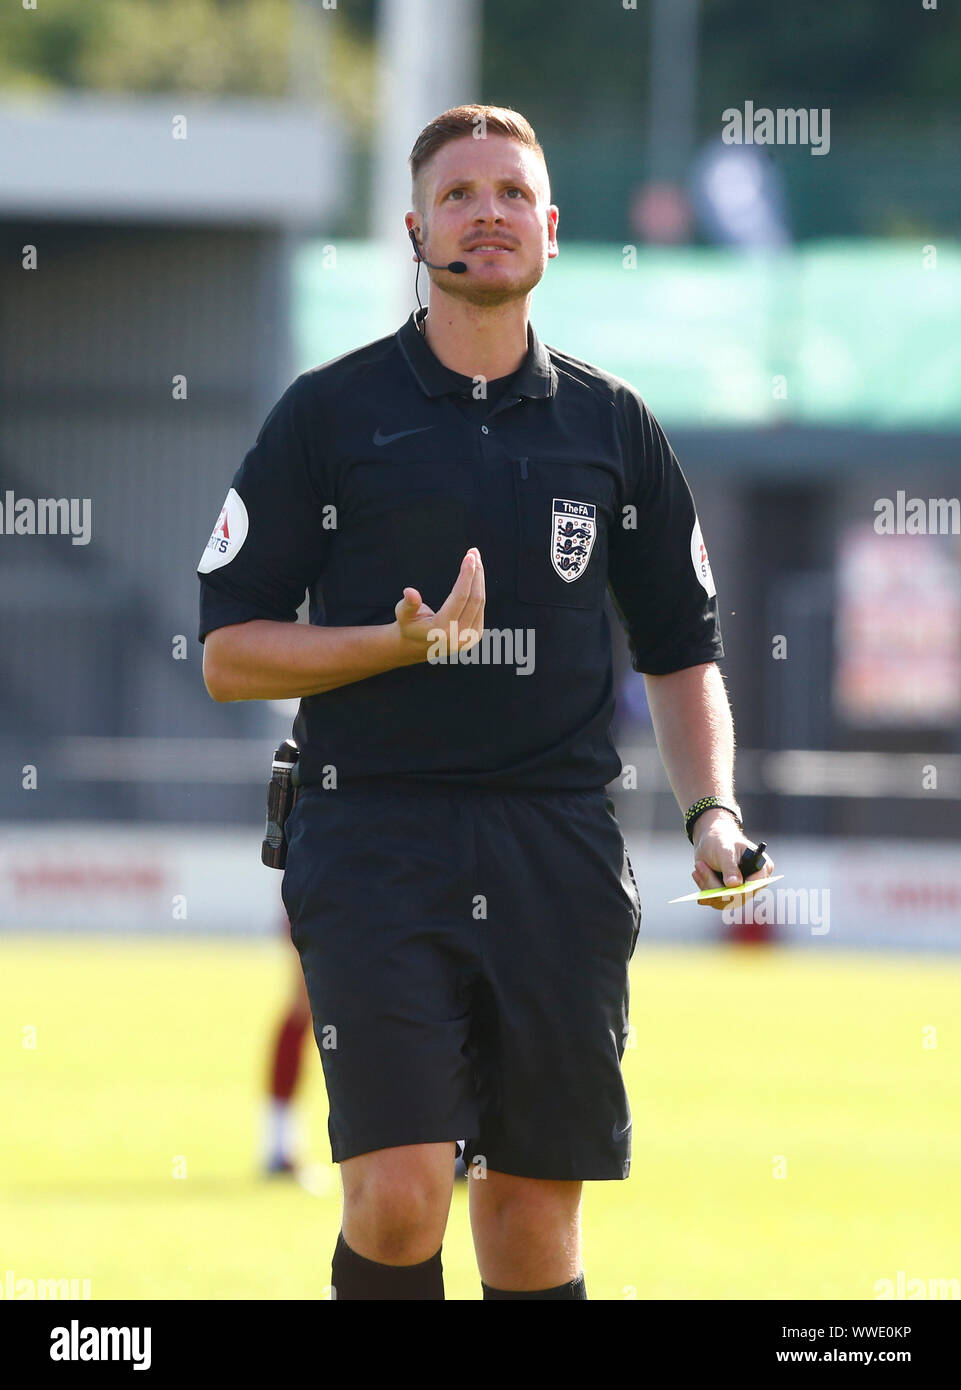 London, Inited Kingdom. 15th Sep, 2019. LONDON, UNITED KINGDOM SEPTEMBER 15. during Barclays FA Women's Spur League between Tottenham Hotspur and Liverpool at The Hive Stadium, London, UK on 15 September 2019 Credit: Action Foto Sport/Alamy Live News Stock Photo